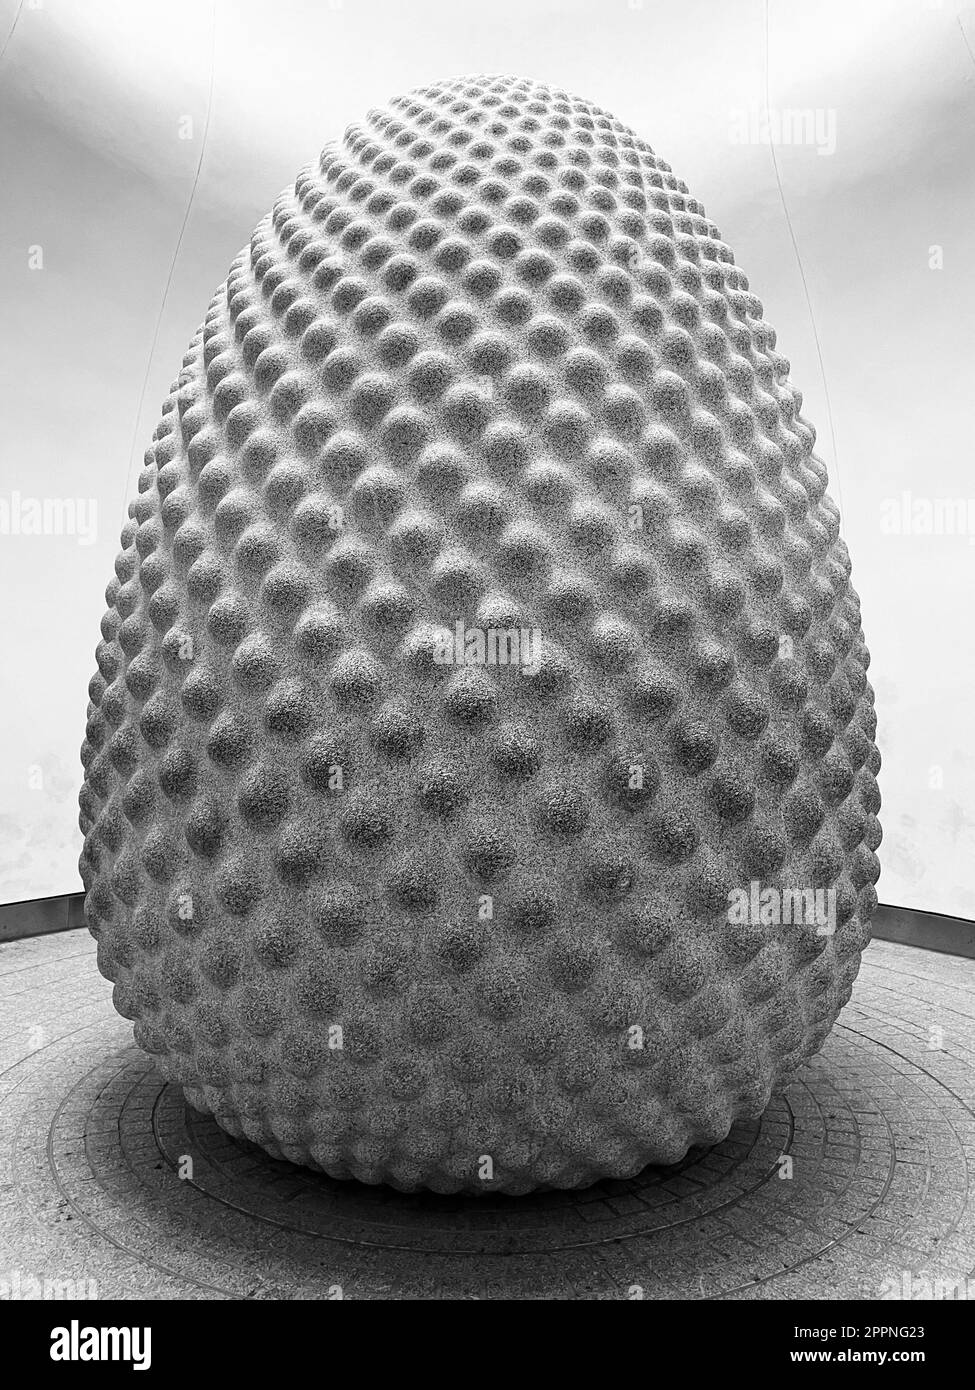 A large, egg-shaped object located in an interior setting Stock Photo